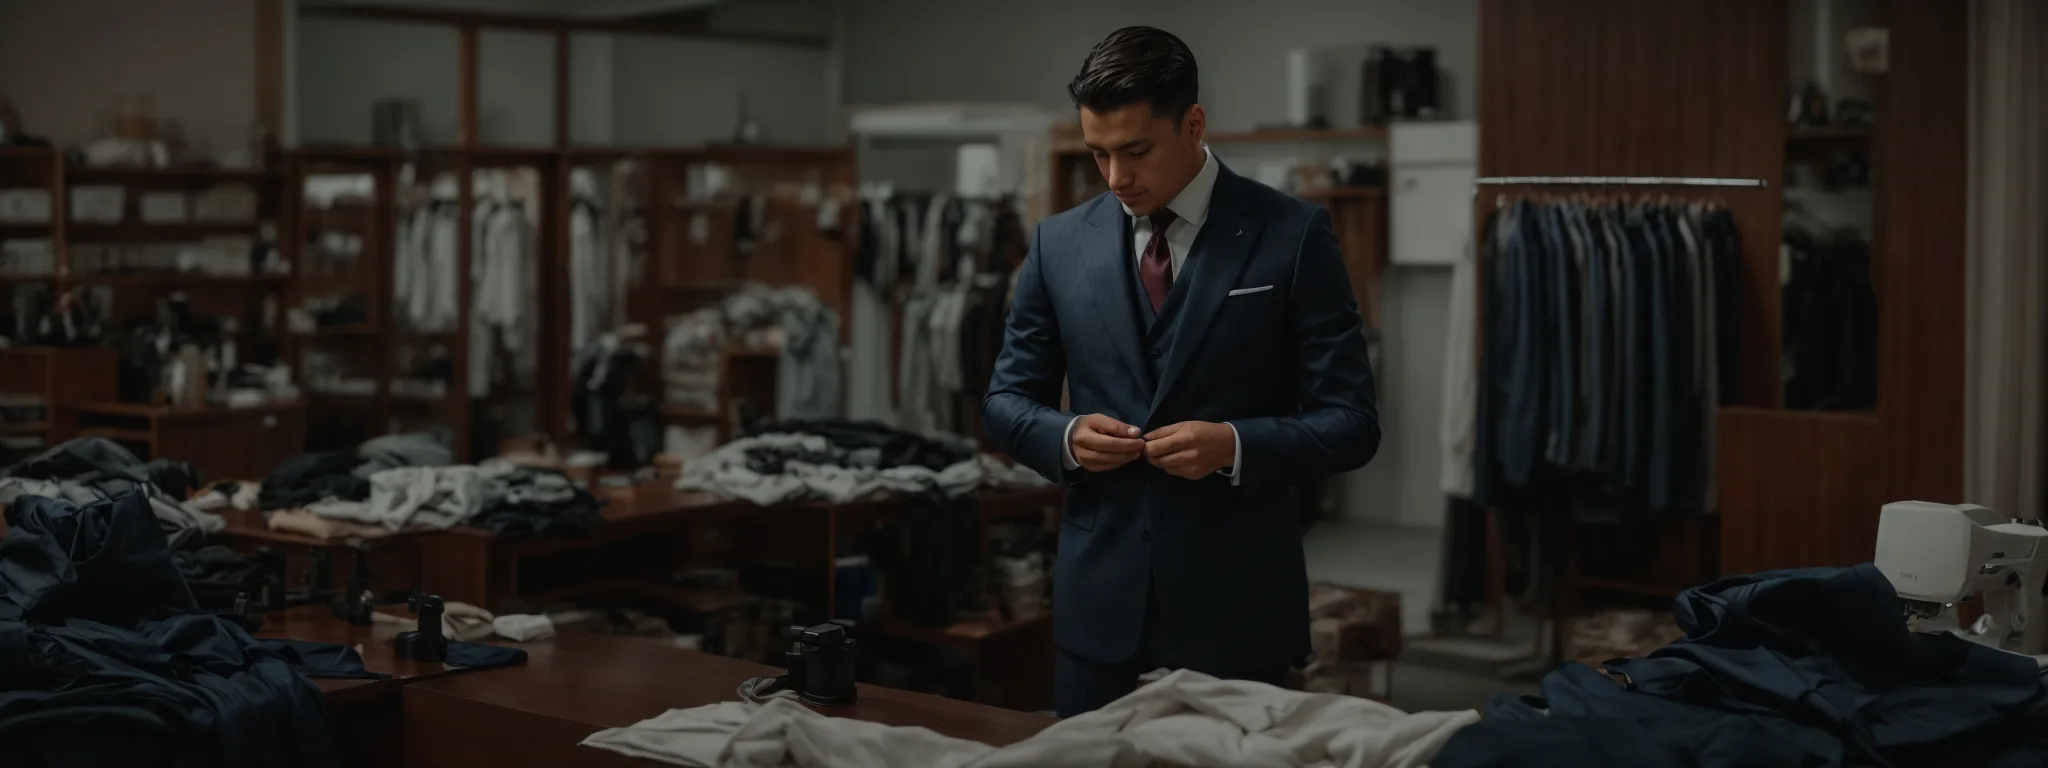 a tailor custom-fitting a suit to illustrate the need for tailor-made seo strategies over standardized models.